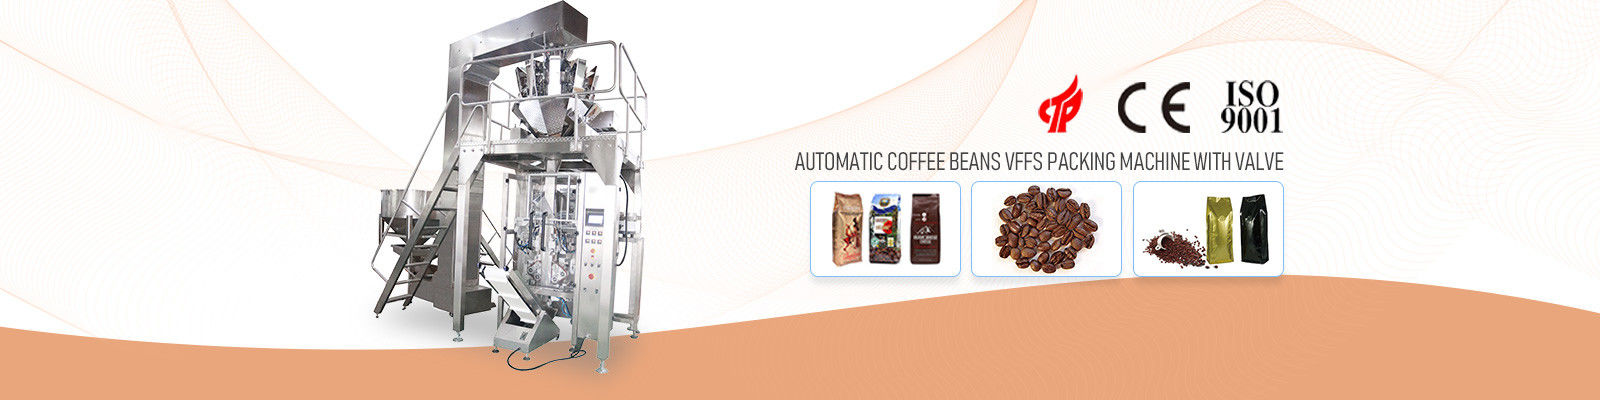 China best Vertical Packaging Machine on sales